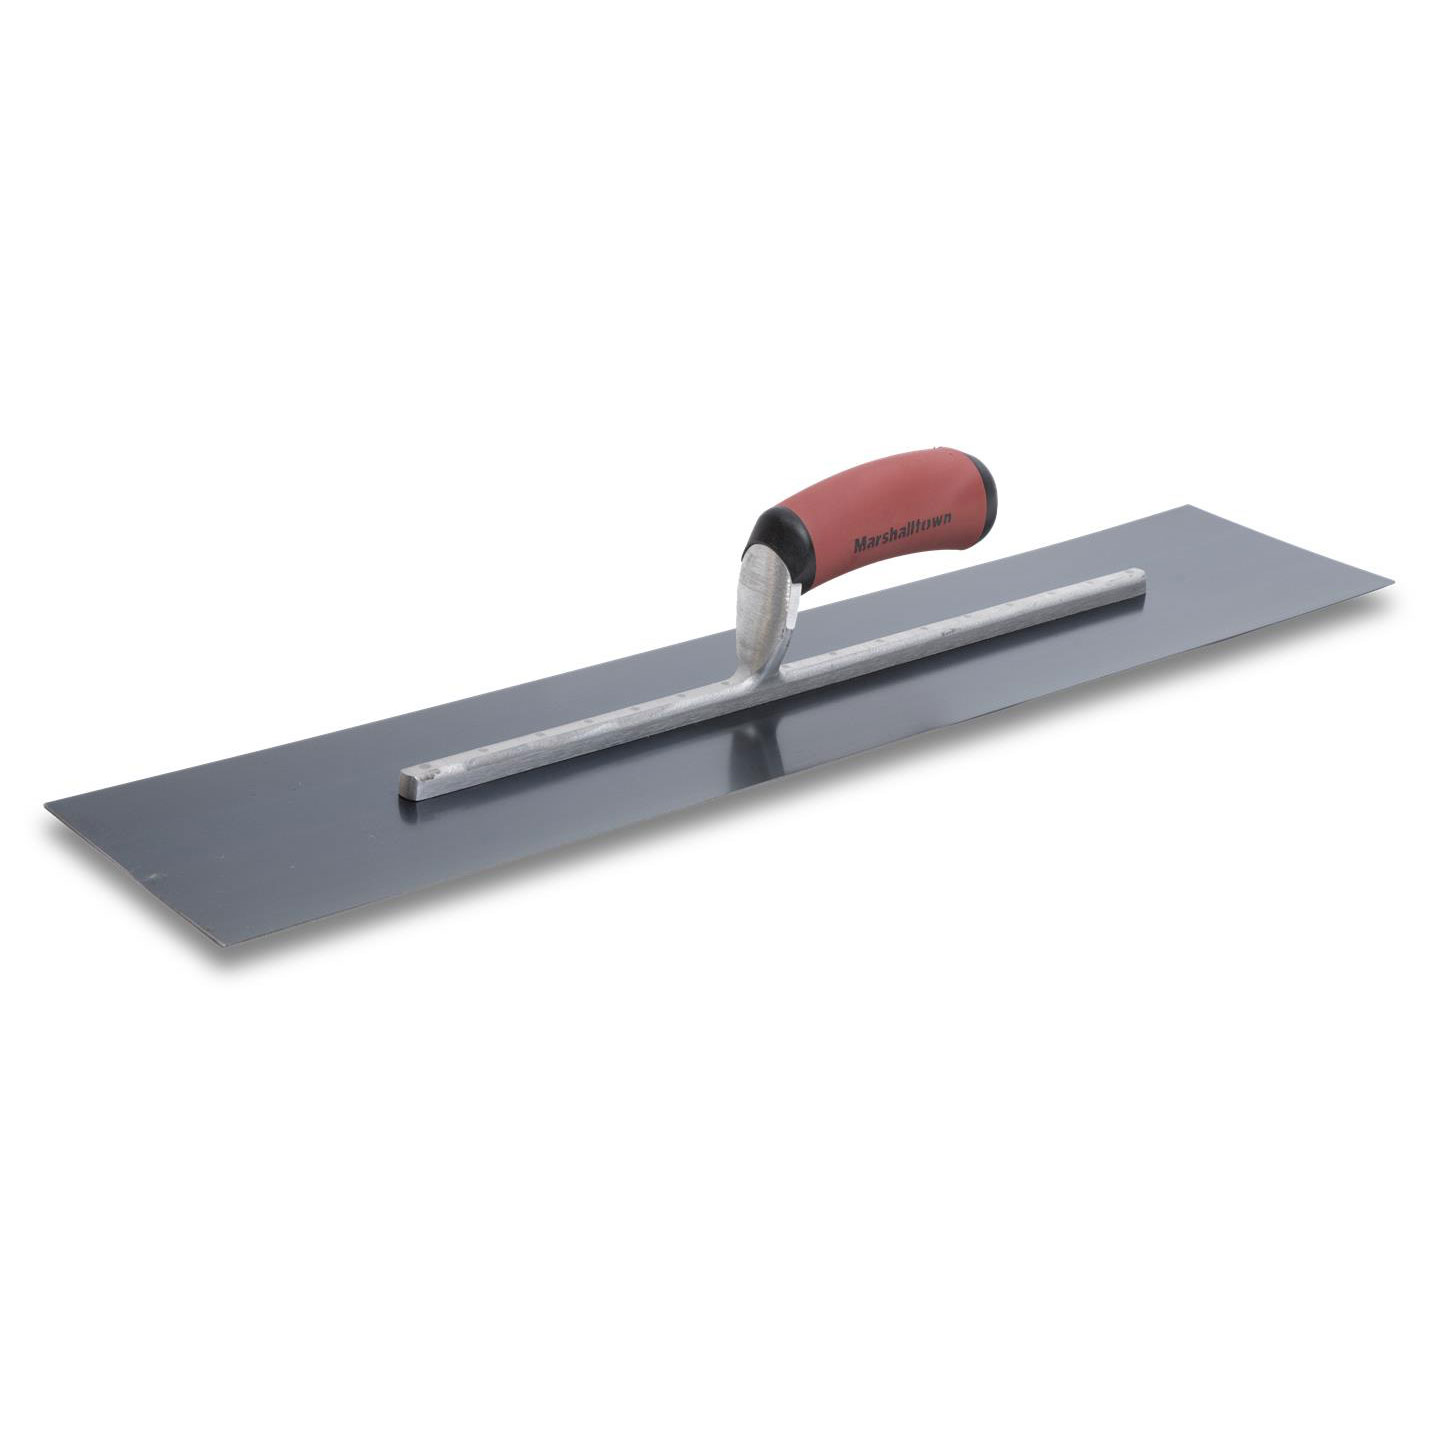 Marshalltown MXS224BD 22in x 4in Blue Steel Finishing Trowel with Curved DuraSoft Handle MXS224BD